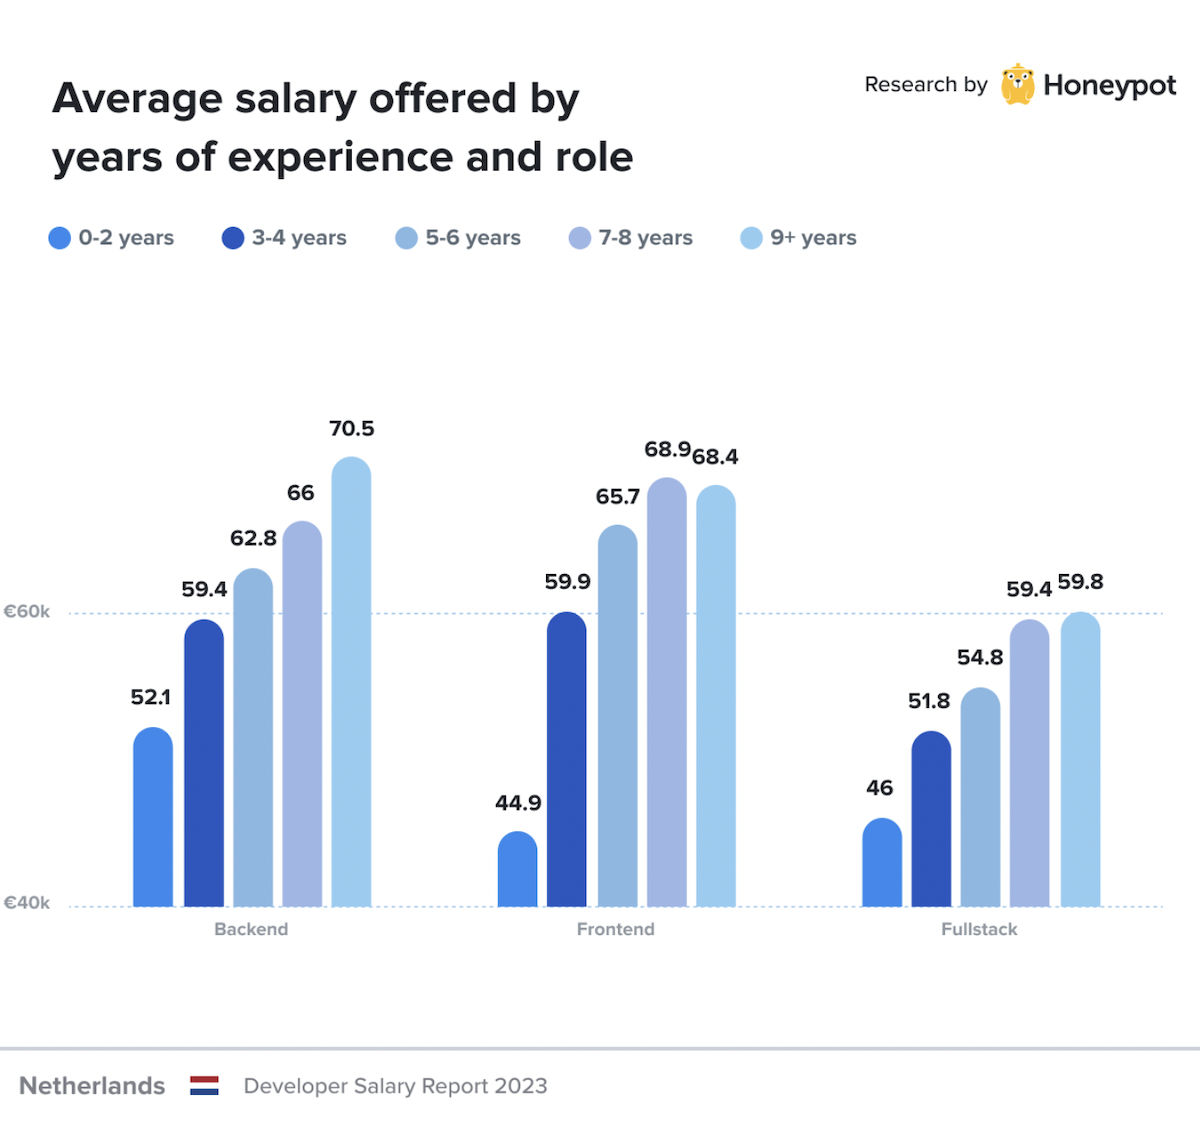 Netherlands – Average offered salary by role and years of experience